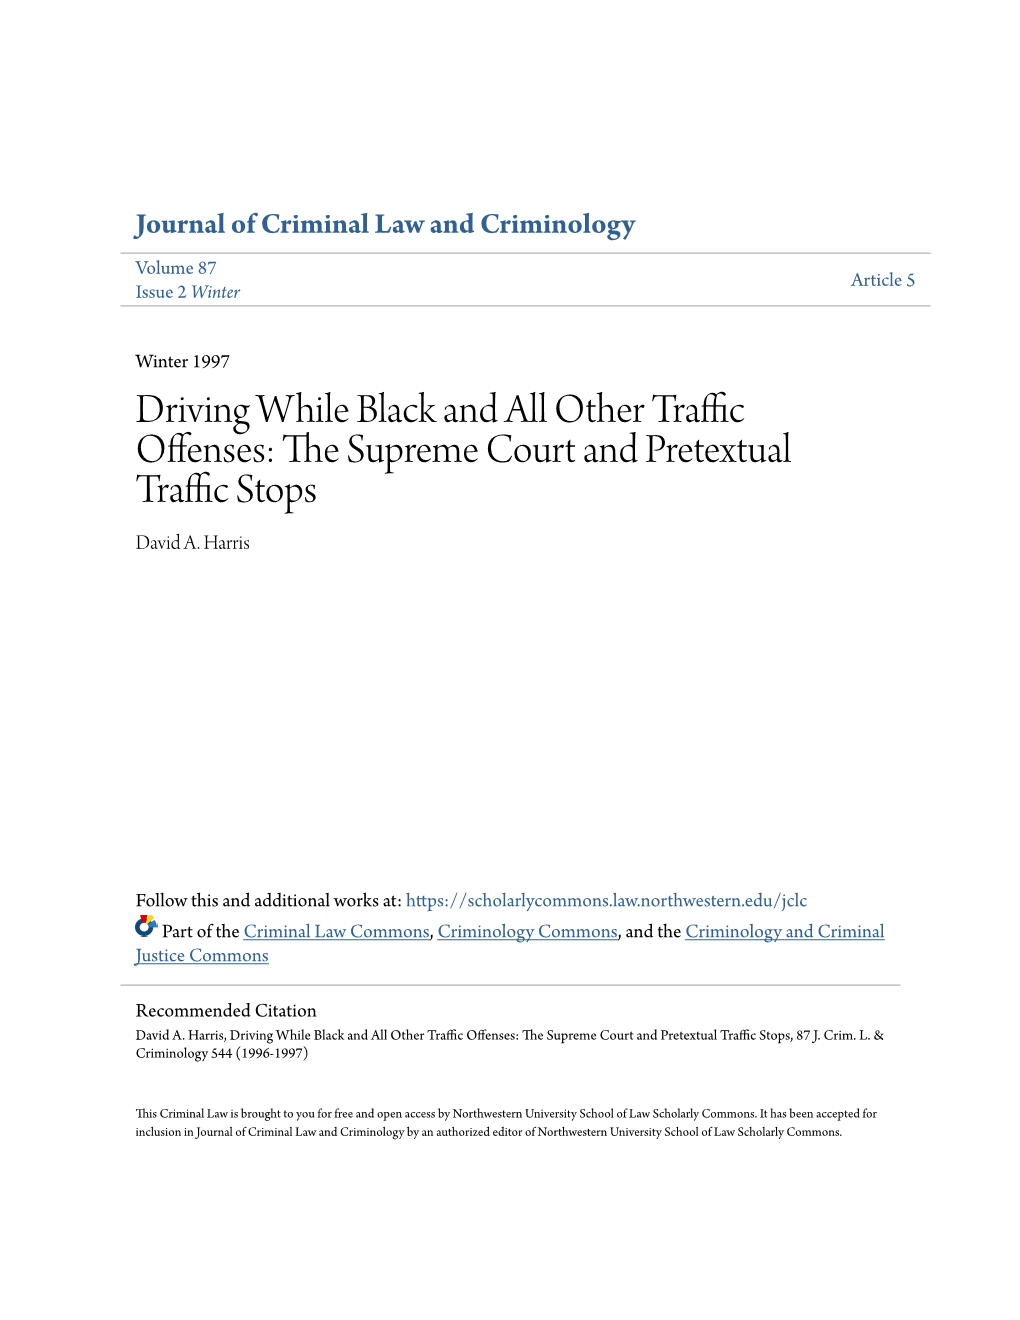 The Supreme Court and Pretextual Traffic Stops